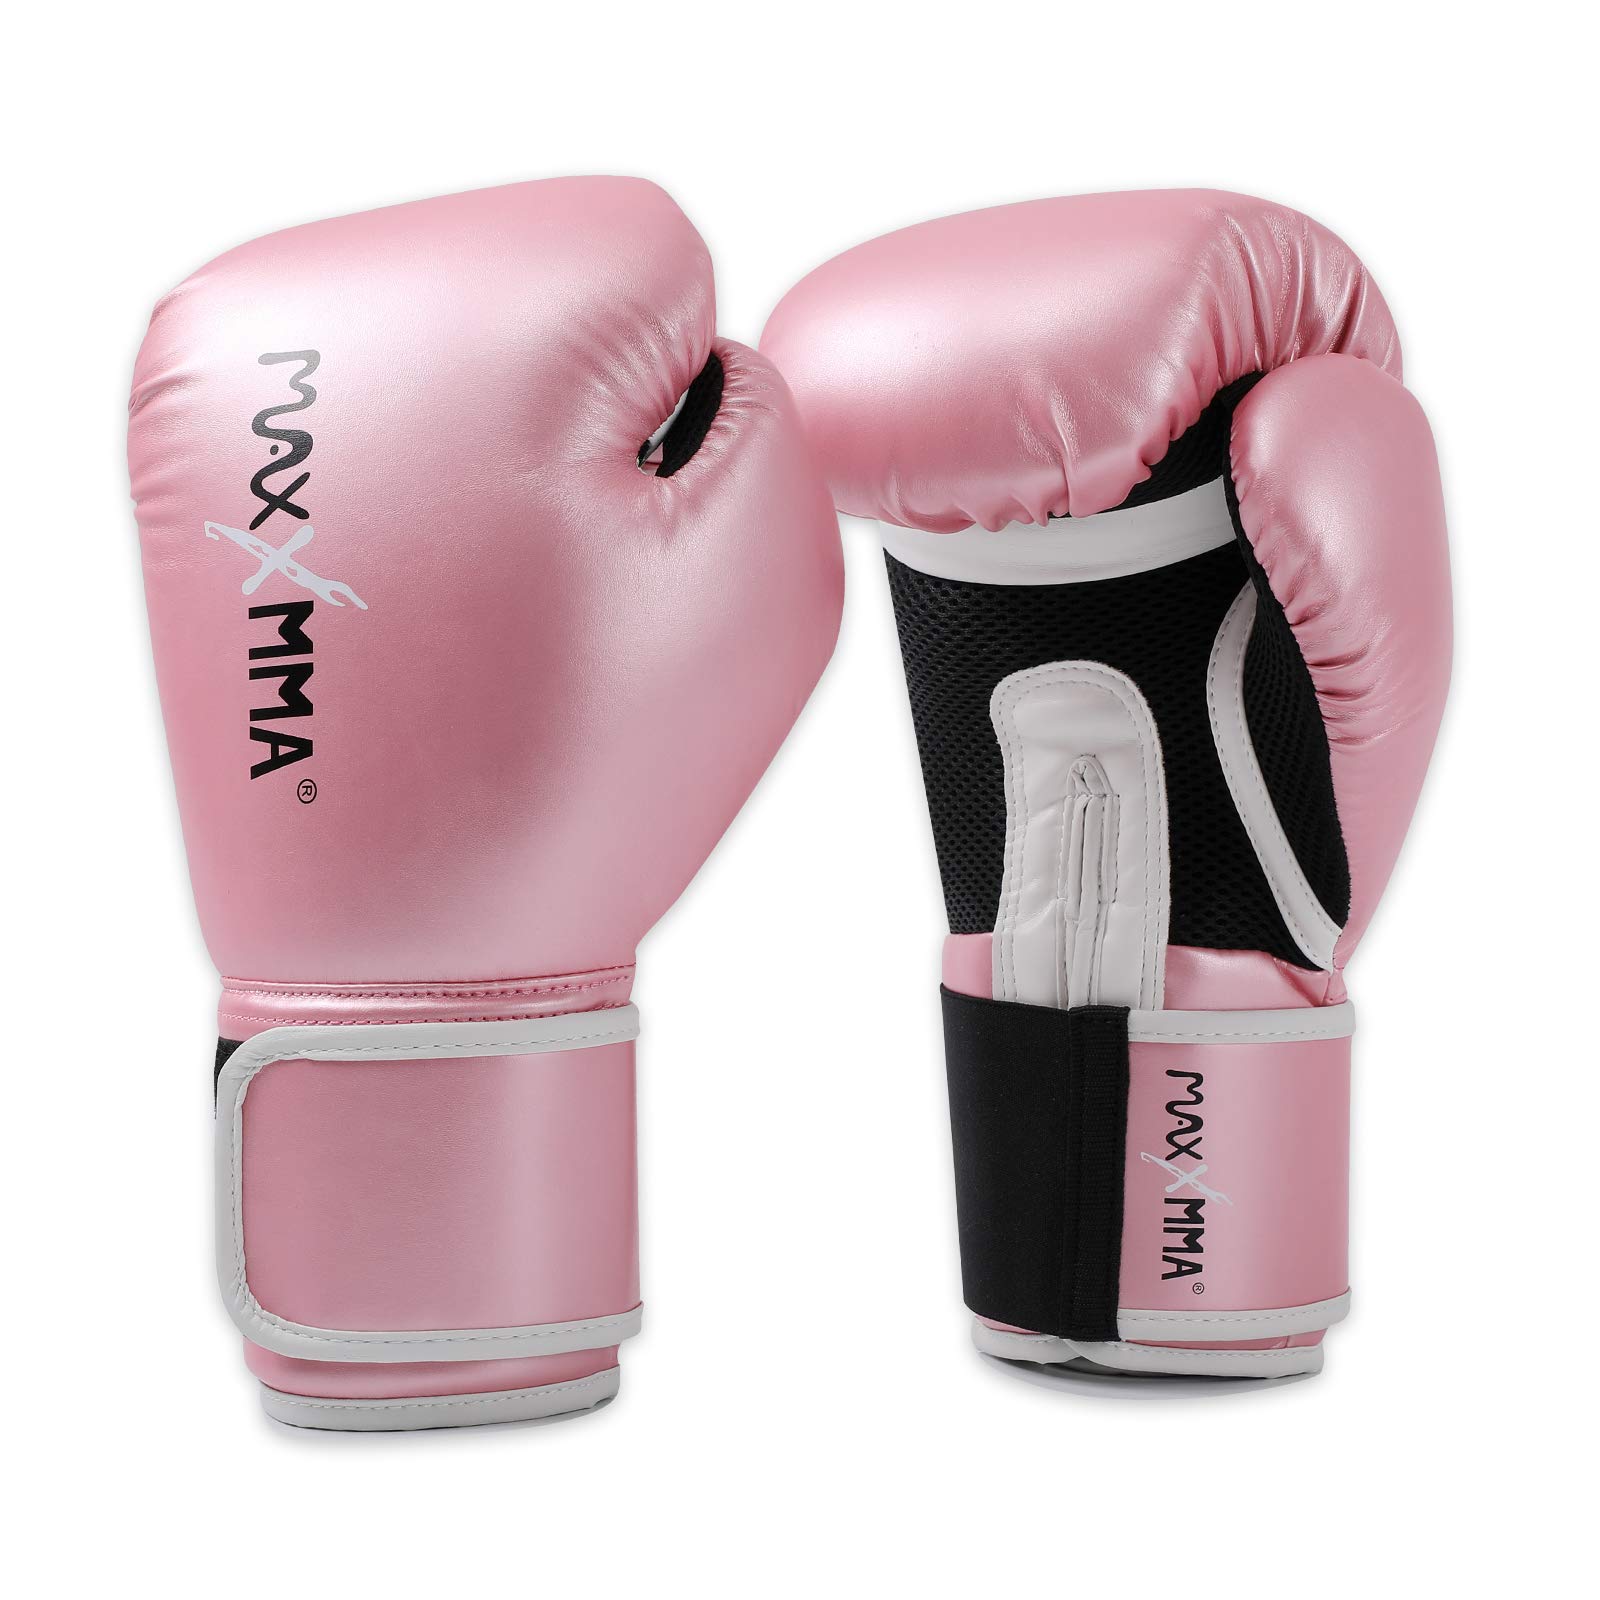 MaxxMMA Pro Style Boxing Gloves for Men and Women, Training Heavy Bag Workout Mitts Muay Thai